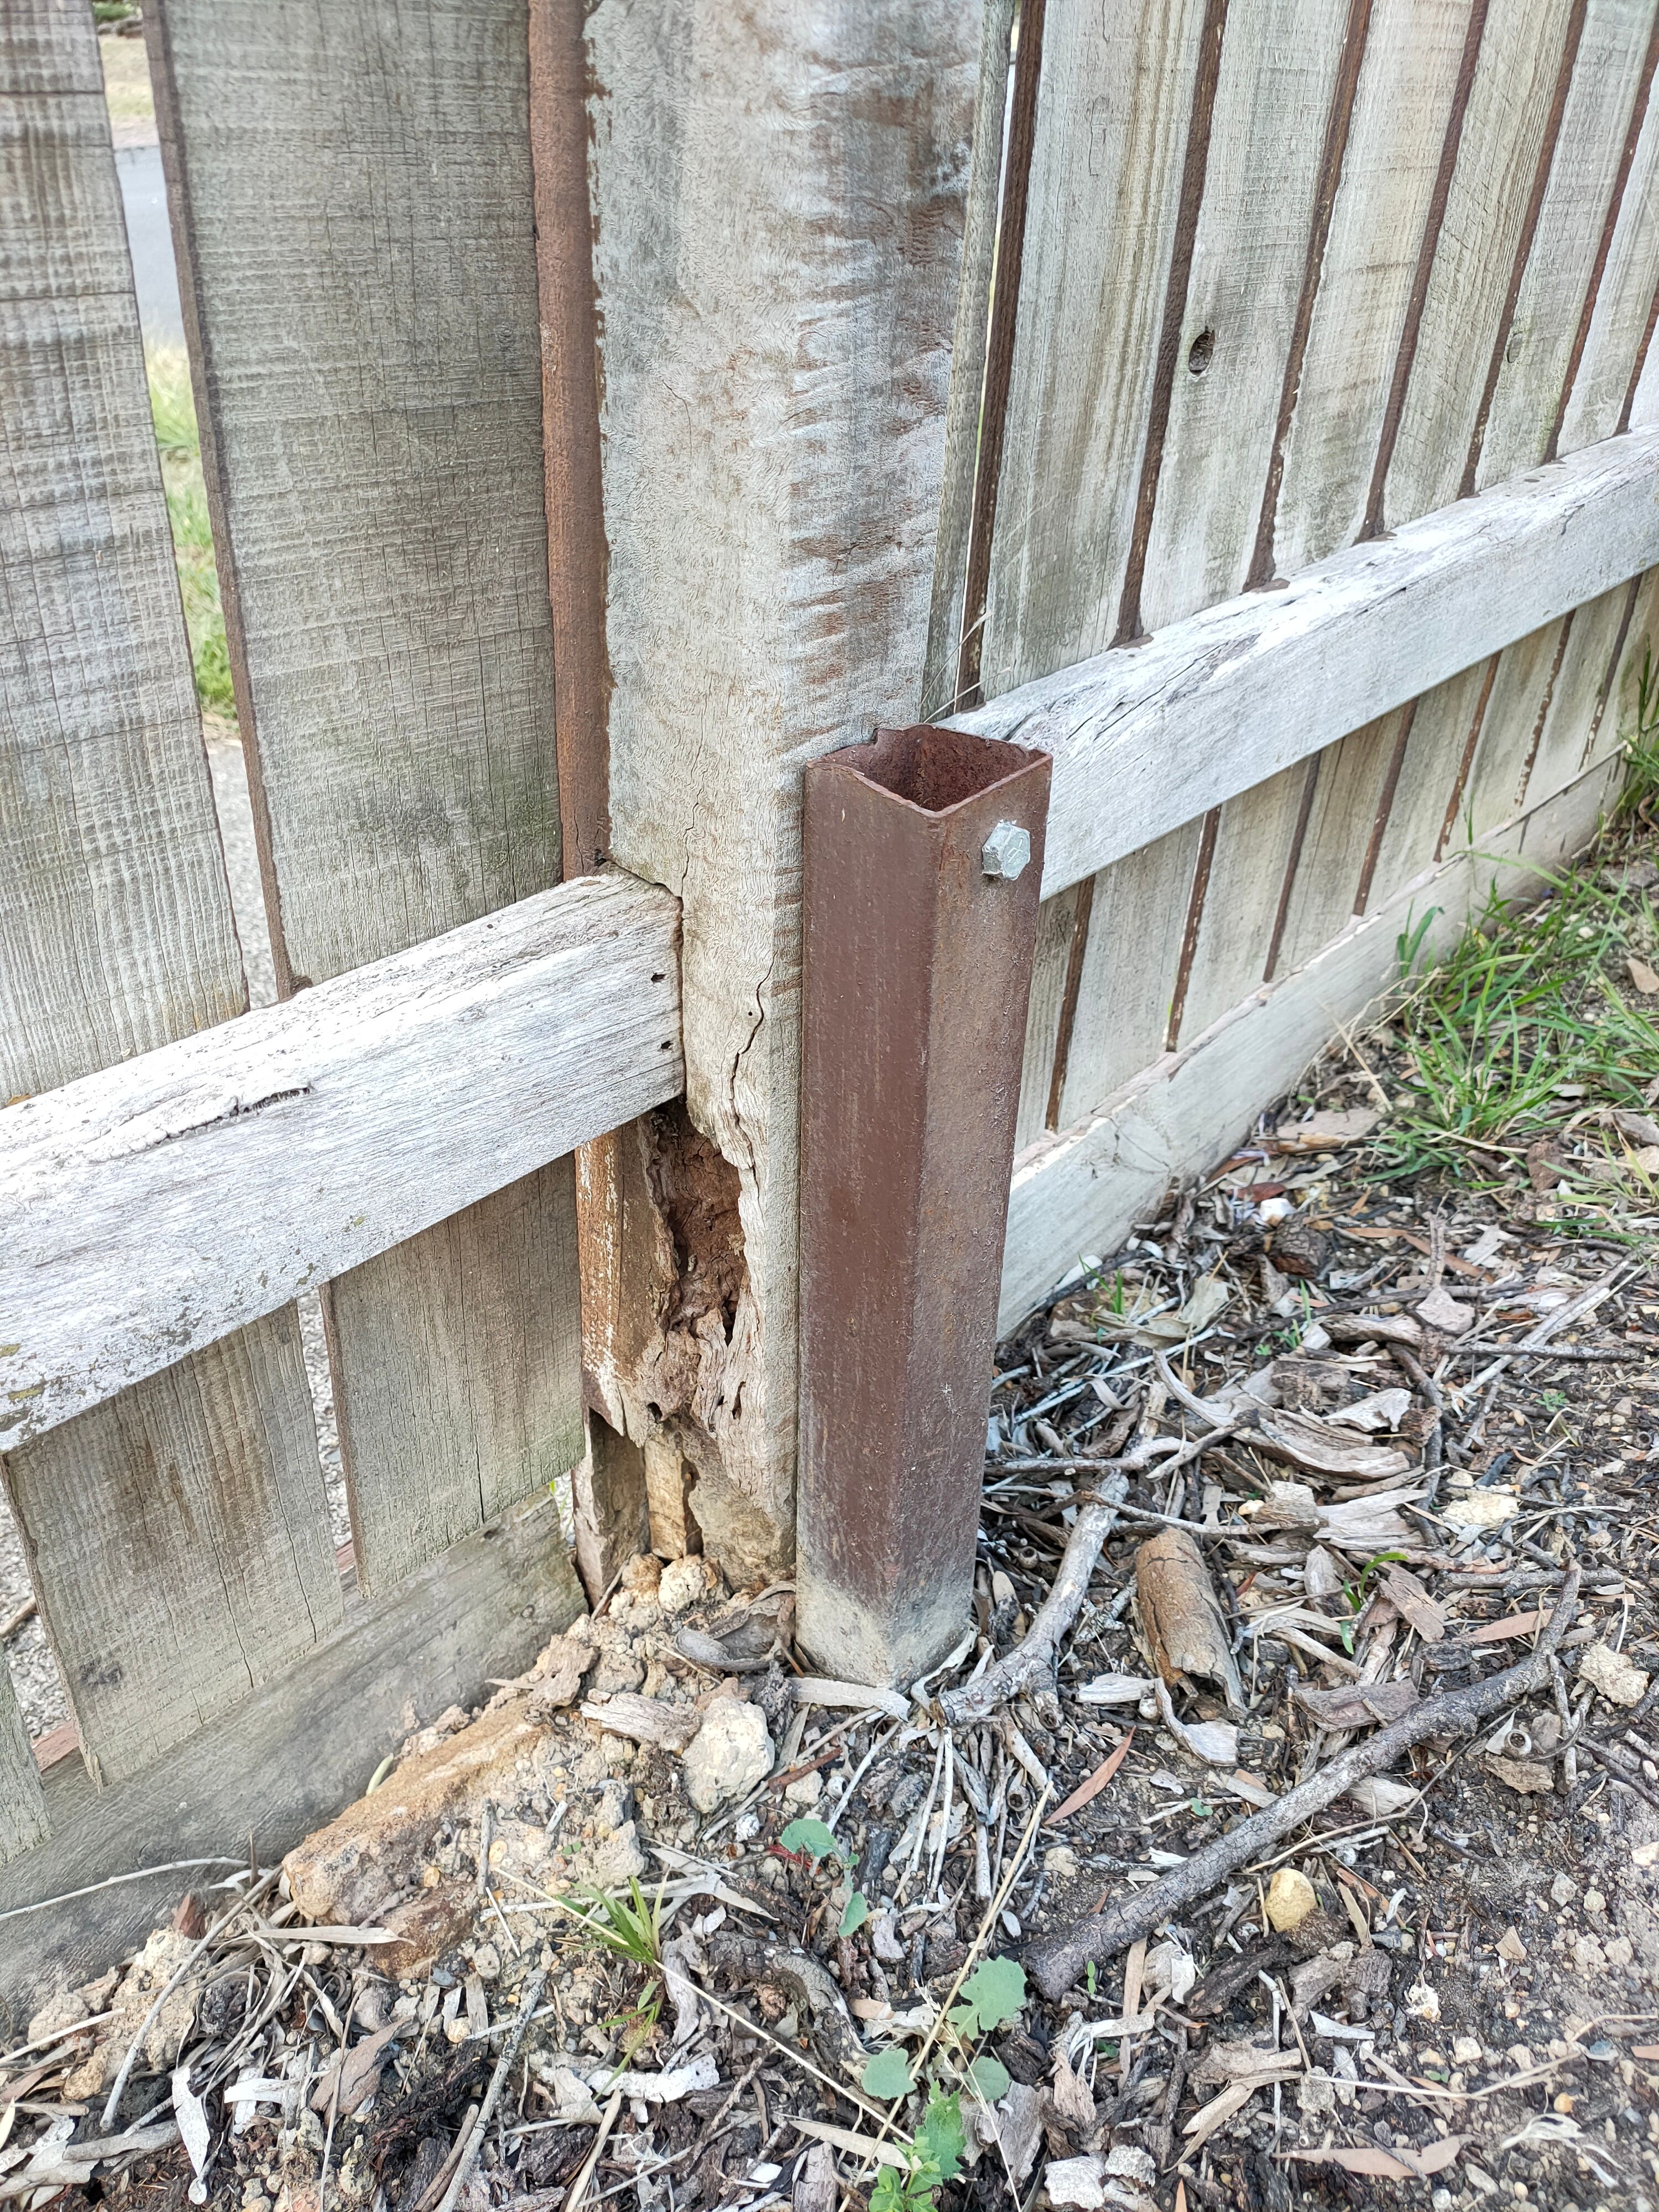 How to Fix a Fence (DIY Fence Repair & Maintenance)